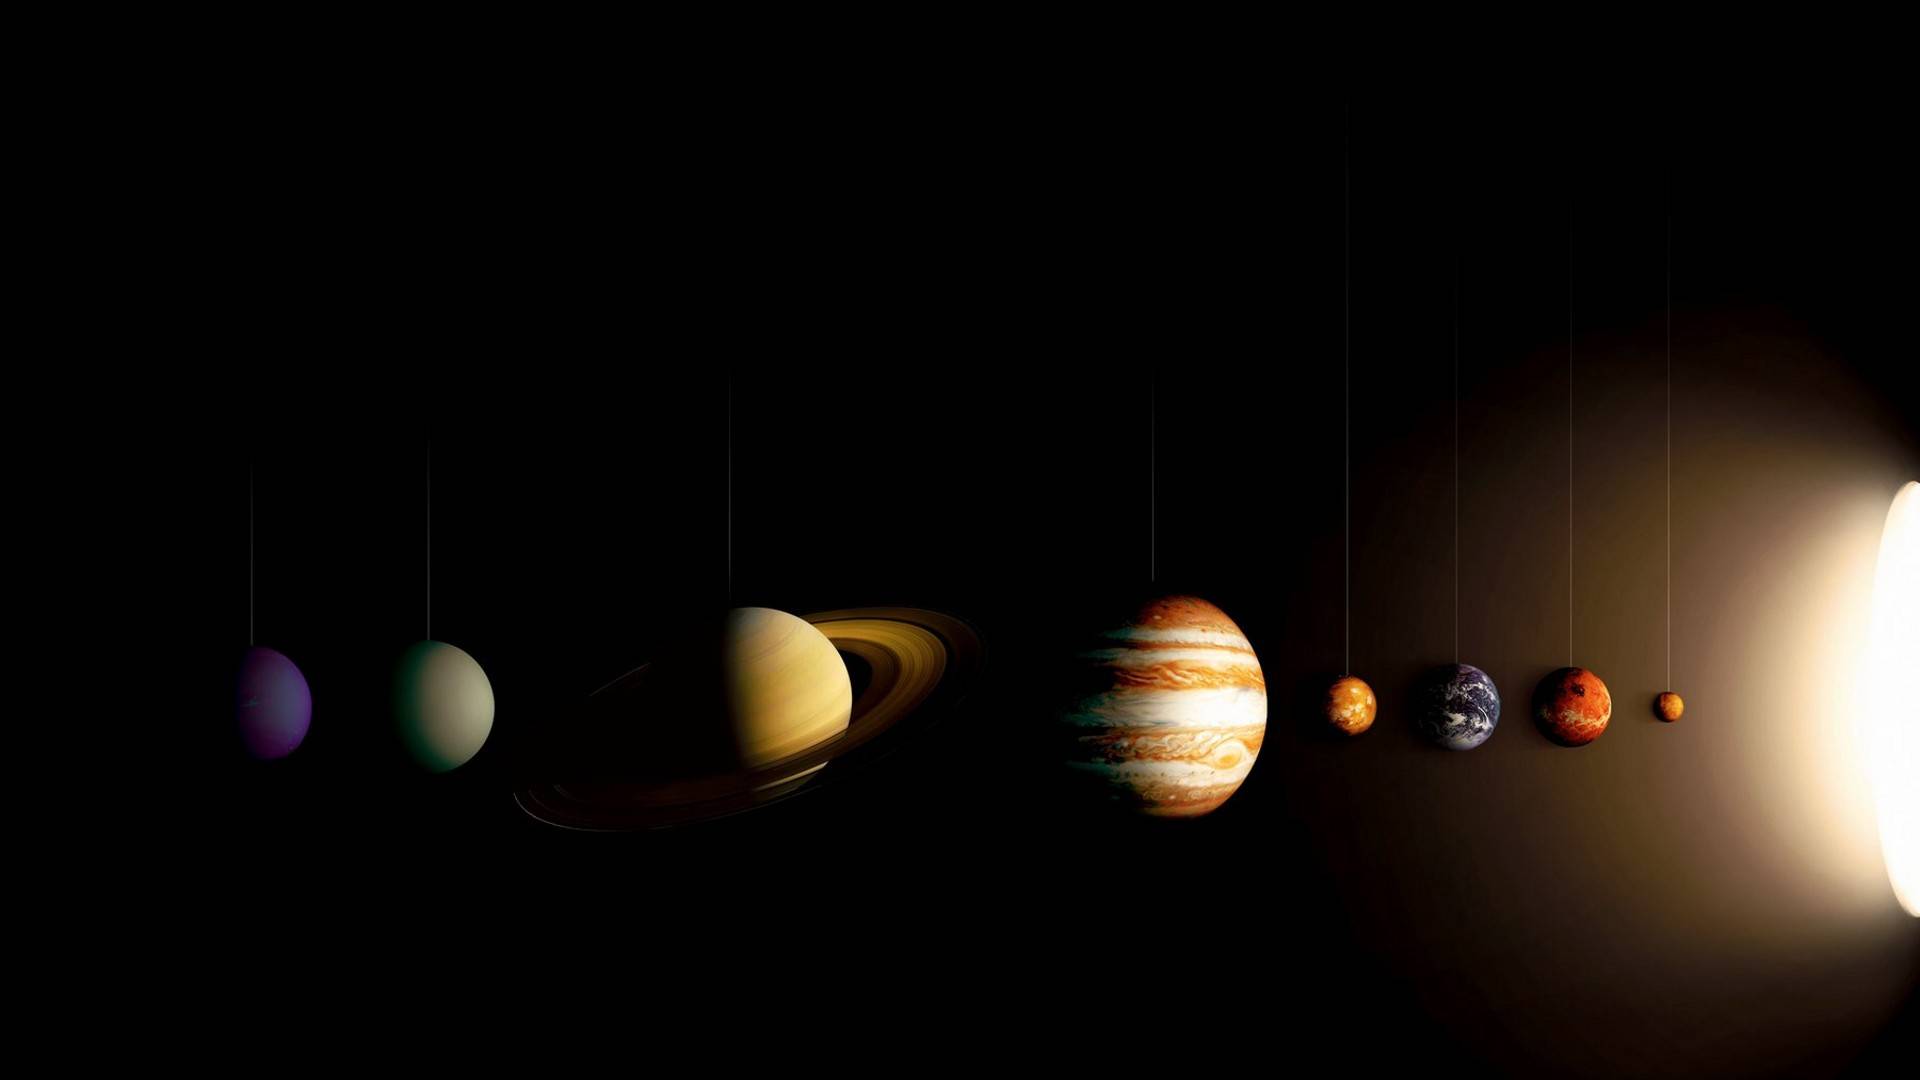 Solar System Wallpaper 1920x1080 - Pics about space